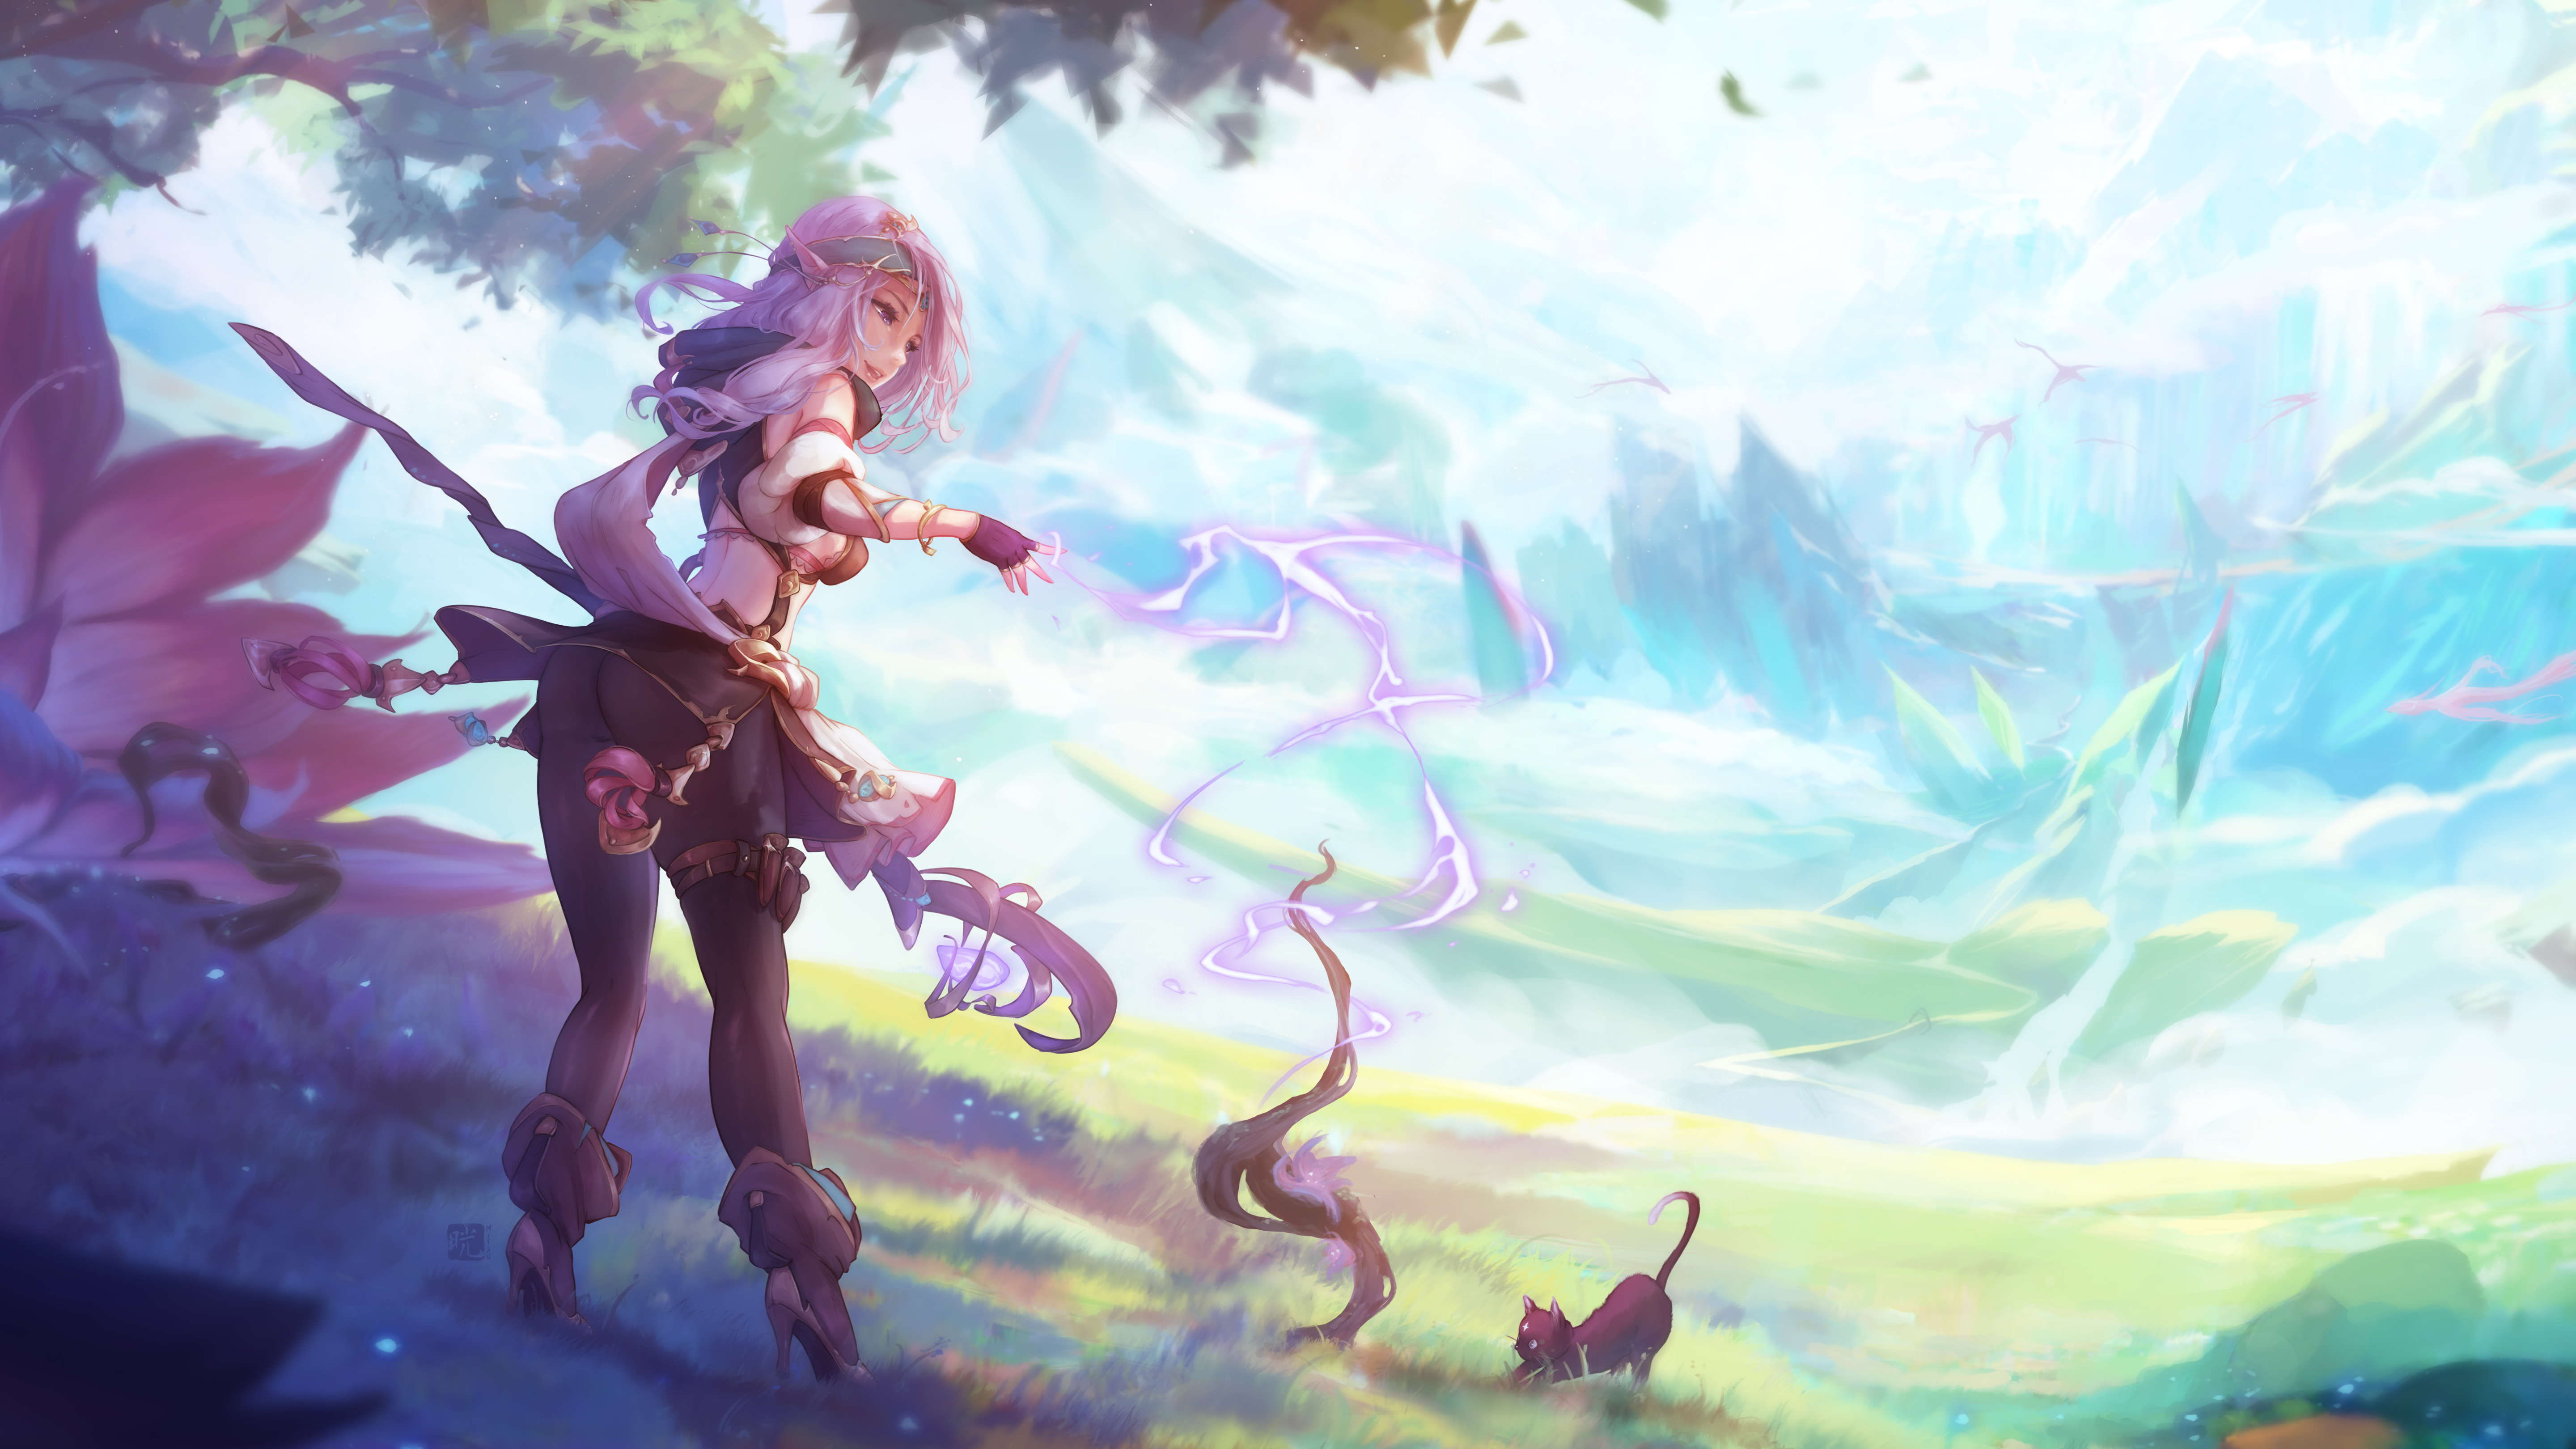 Elves Fantasy Girl Pointed Ears Original Characters Scepters Magic Cats Concept Art Fantasy Art Artw 5760x3240